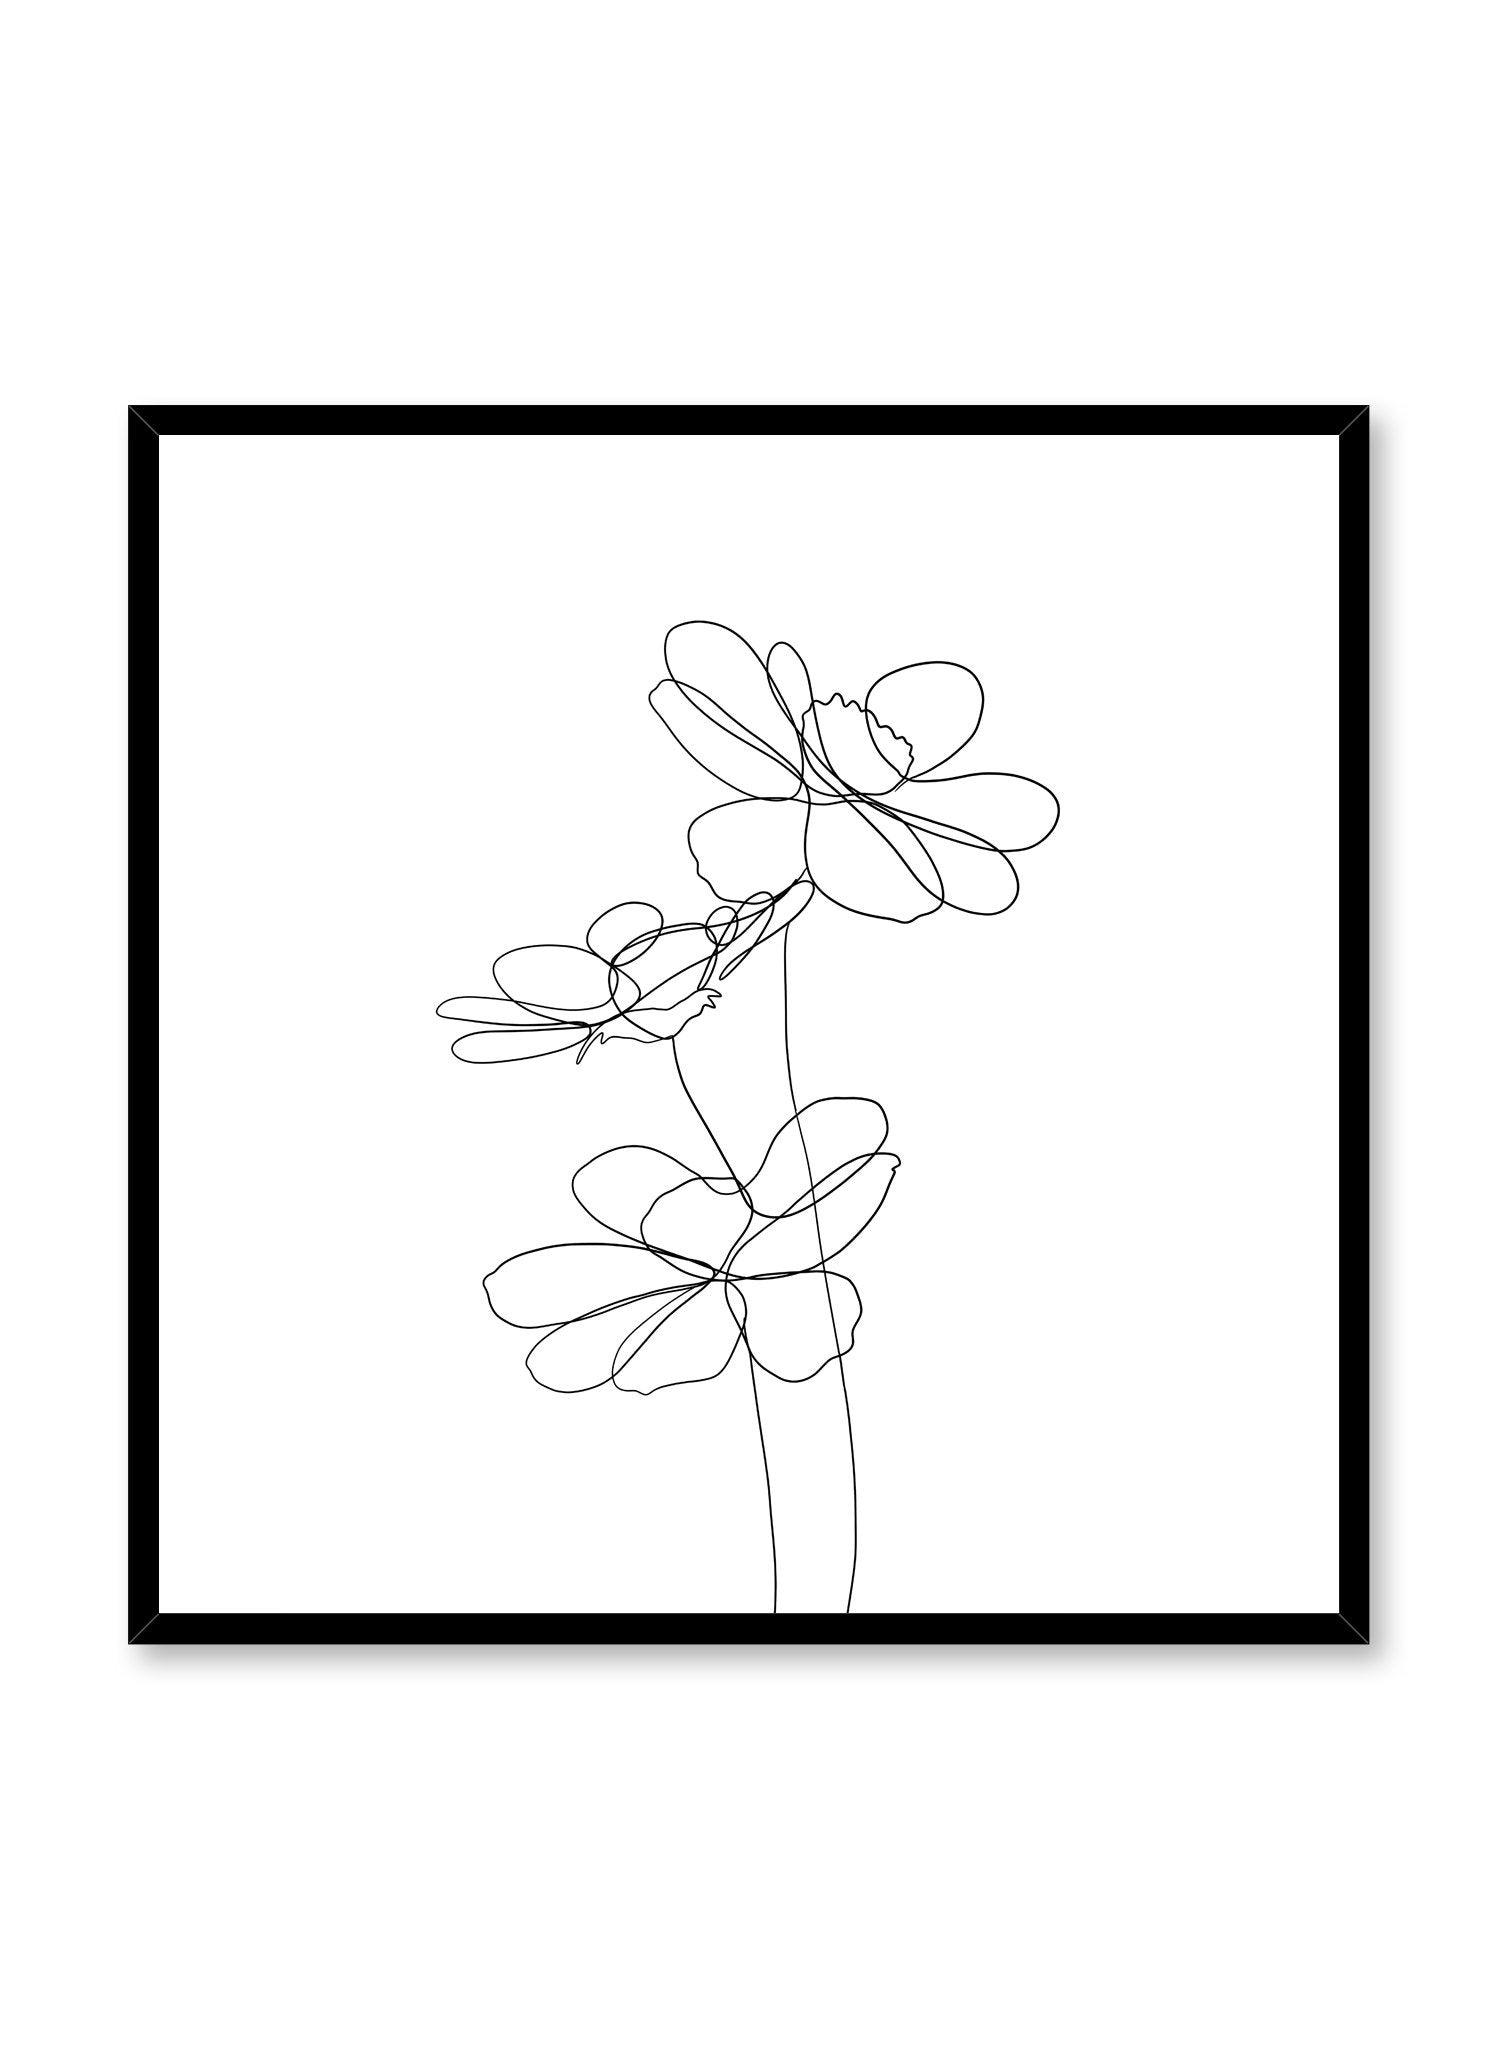 Modern minimalist delicate line art poster by Opposite Wall - Pretty Petals in square format